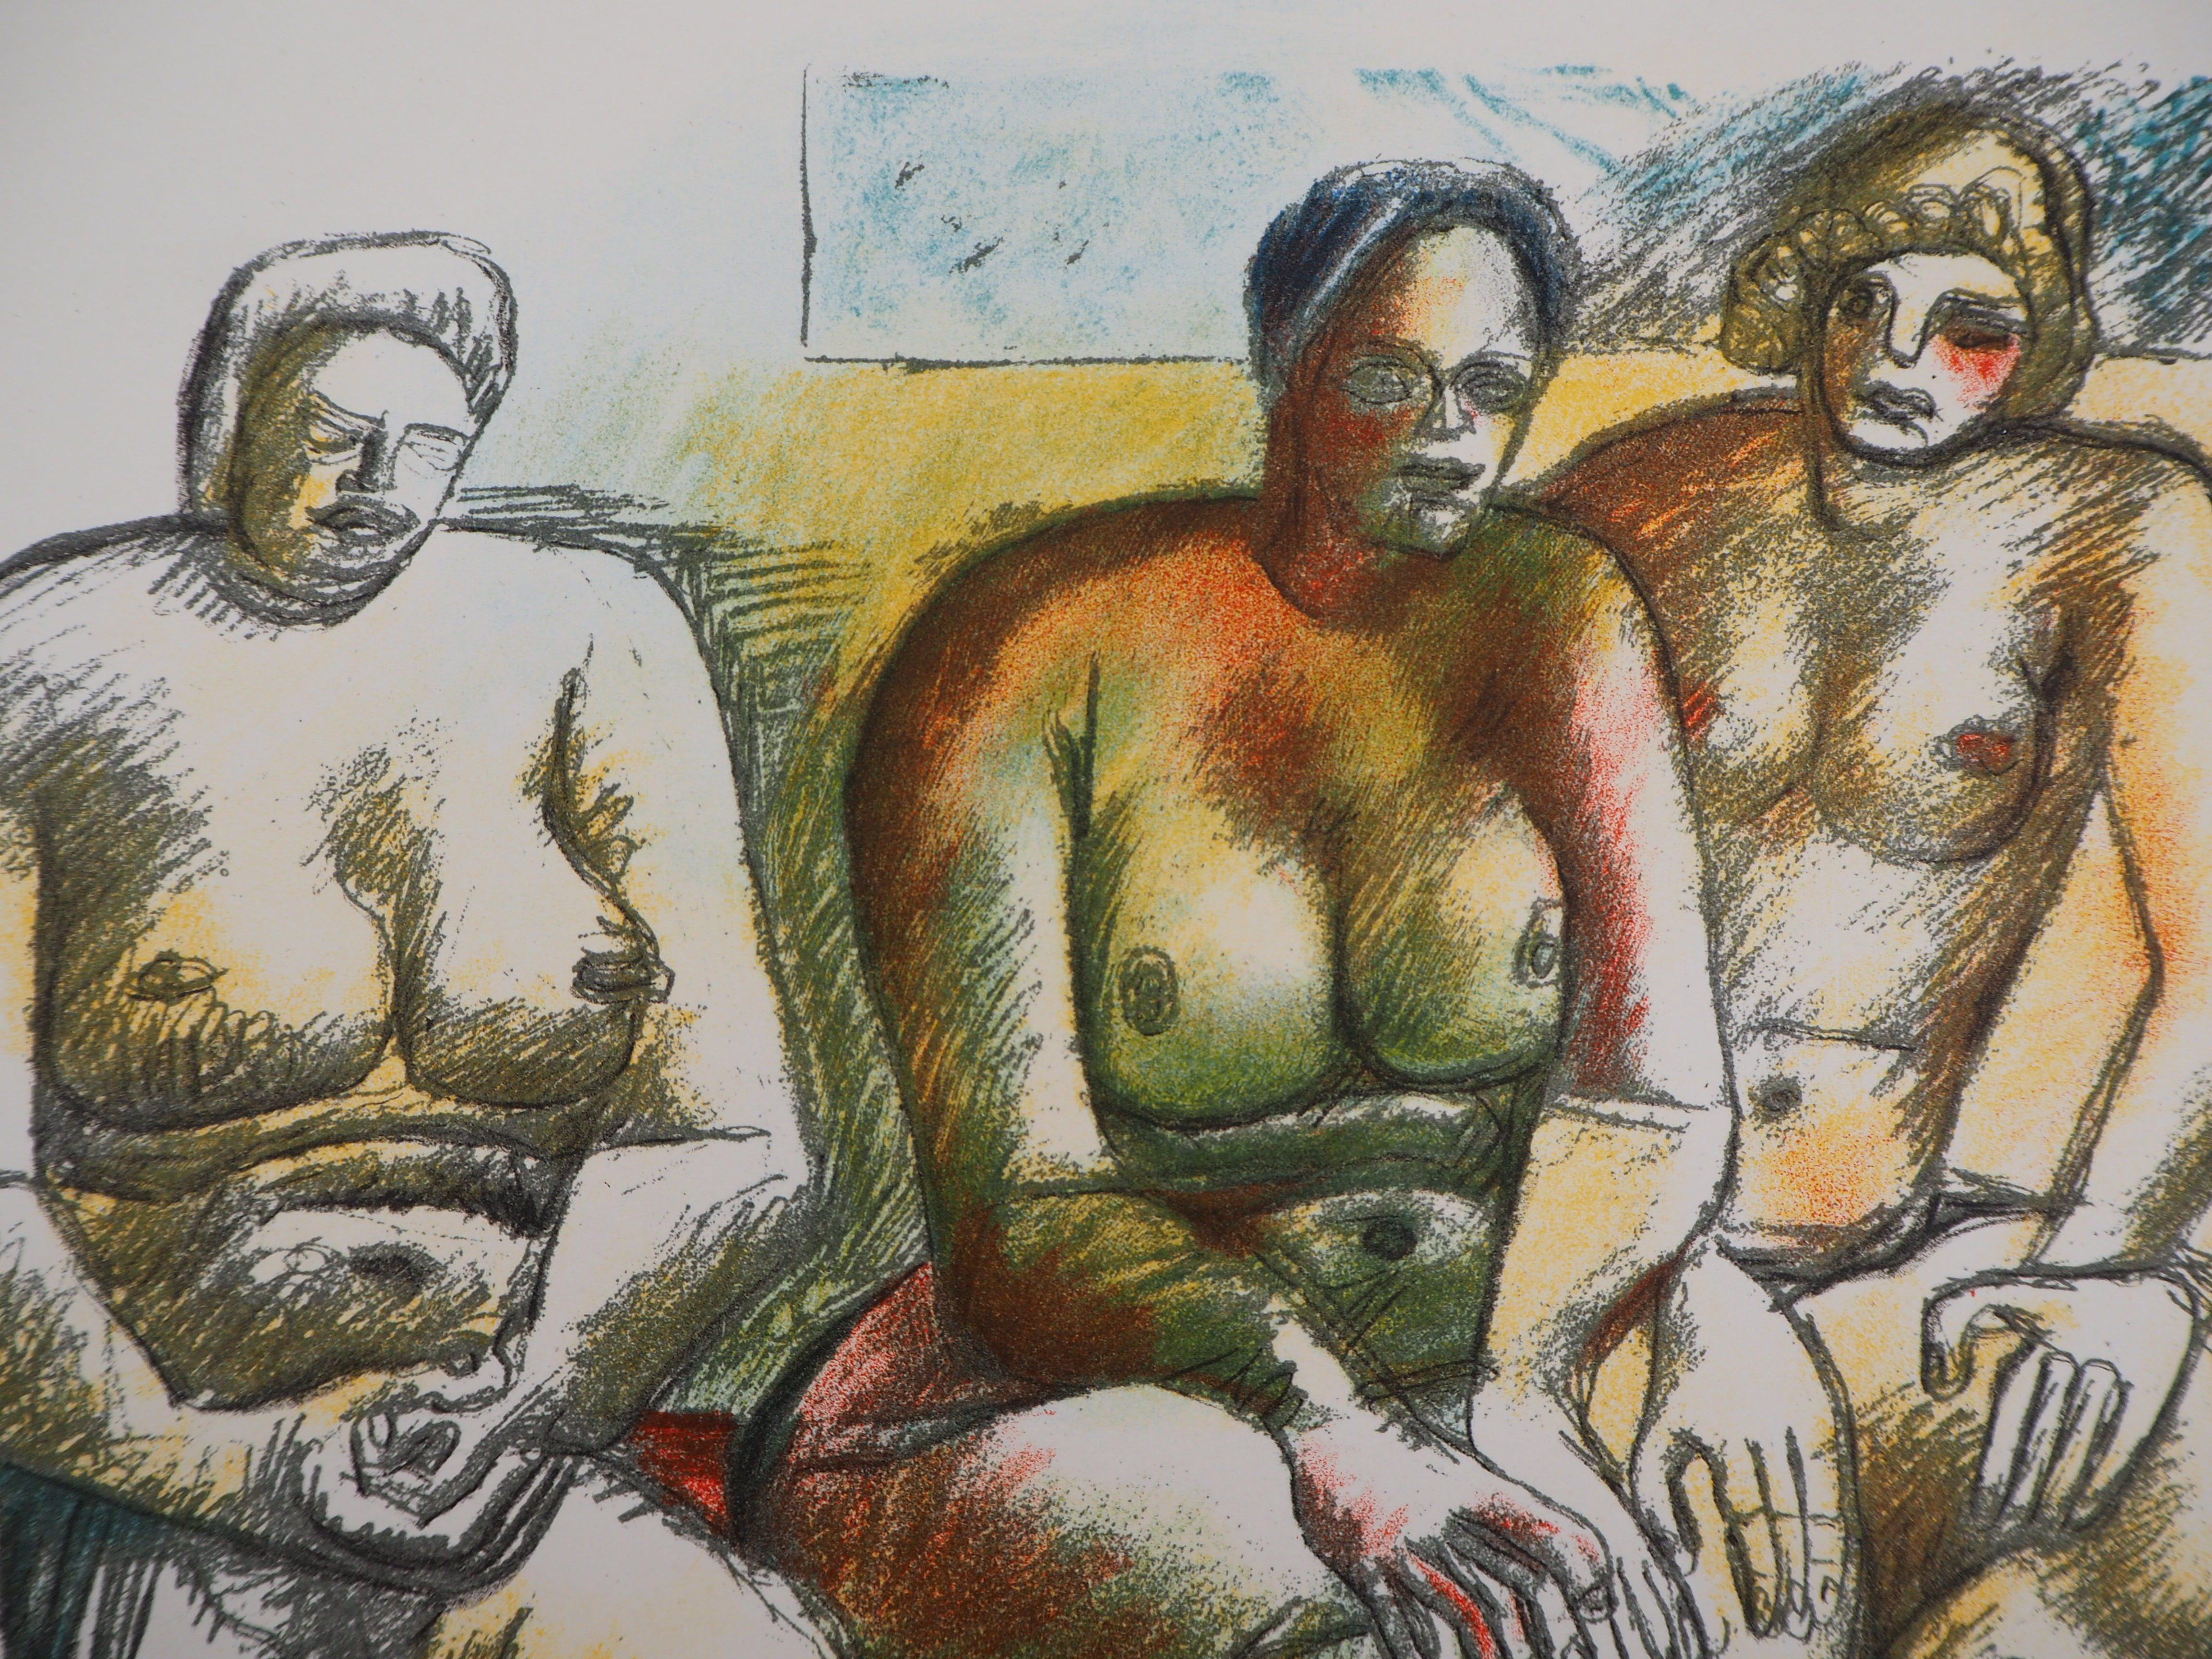 Le Corbusier (1887-1965)
Three Nudes, 1938

Original lithograph
Signature printed in the plate
Dated in the plate
On light vellum 21 x 27 cm (c. 8 x 11 inch)

Very good condition, paper lightly yellowed at the edge